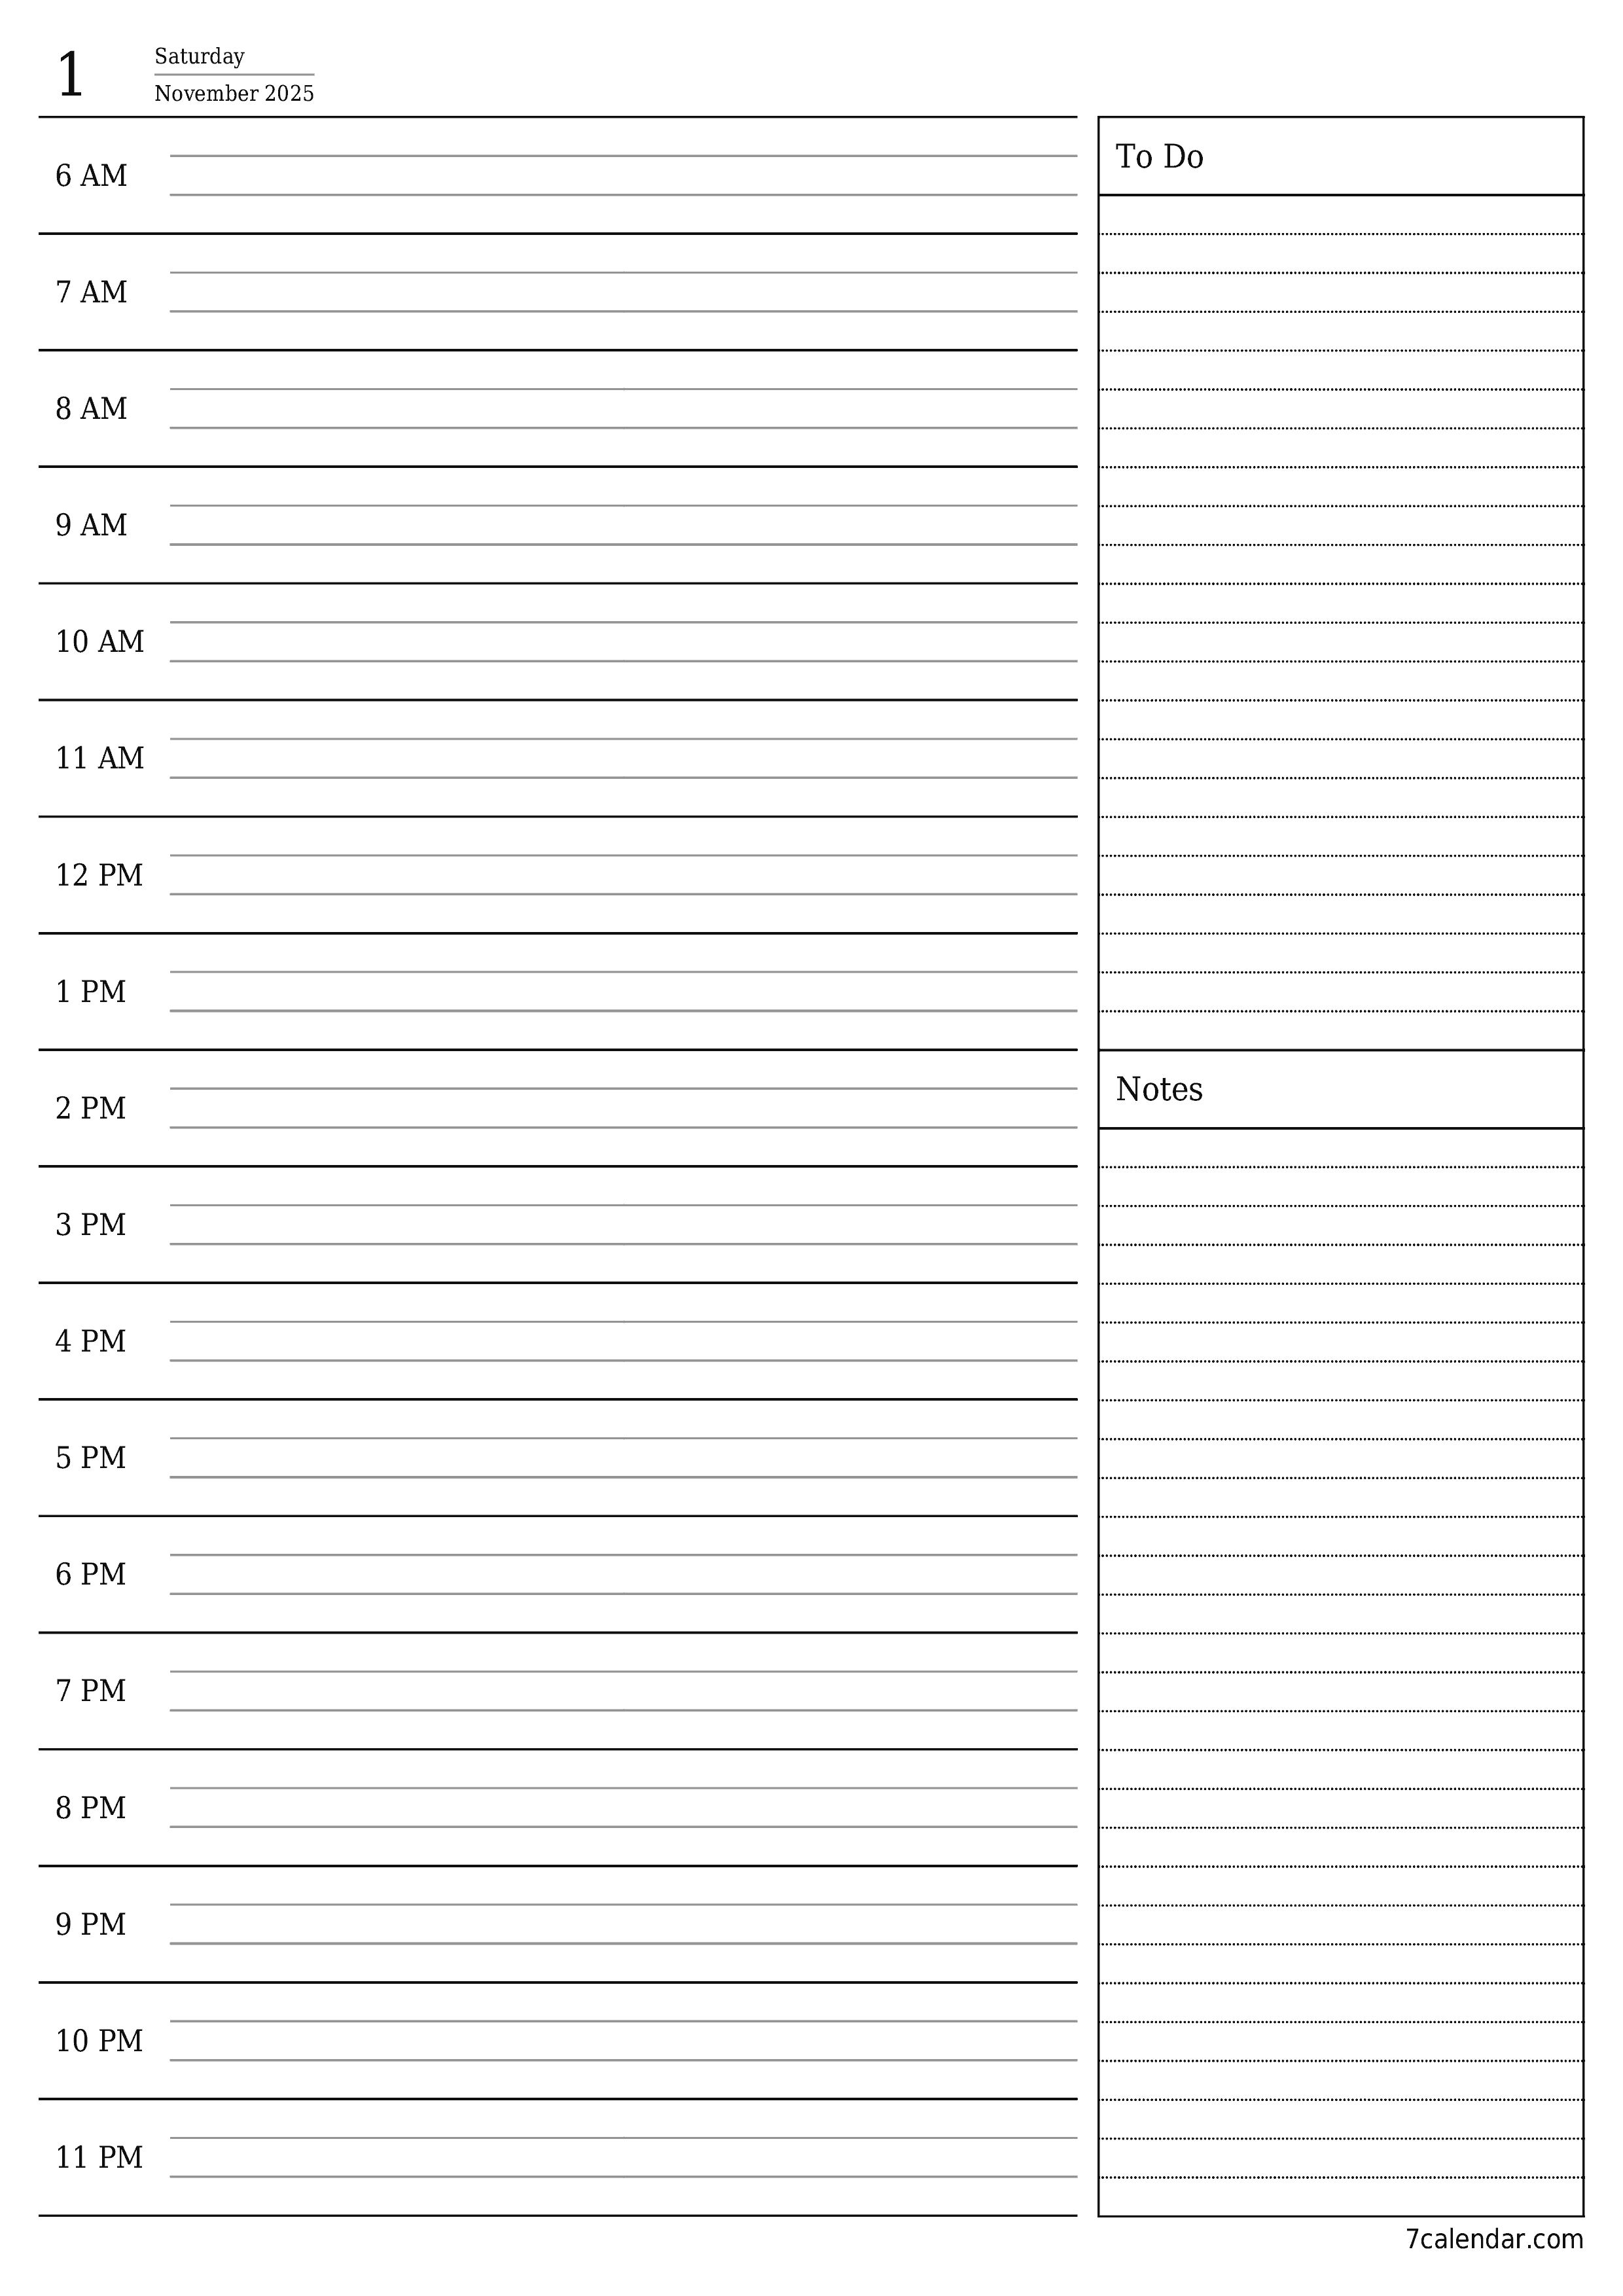 Blank daily printable calendar and planner for day November 2025 with notes, save and print to PDF PNG English